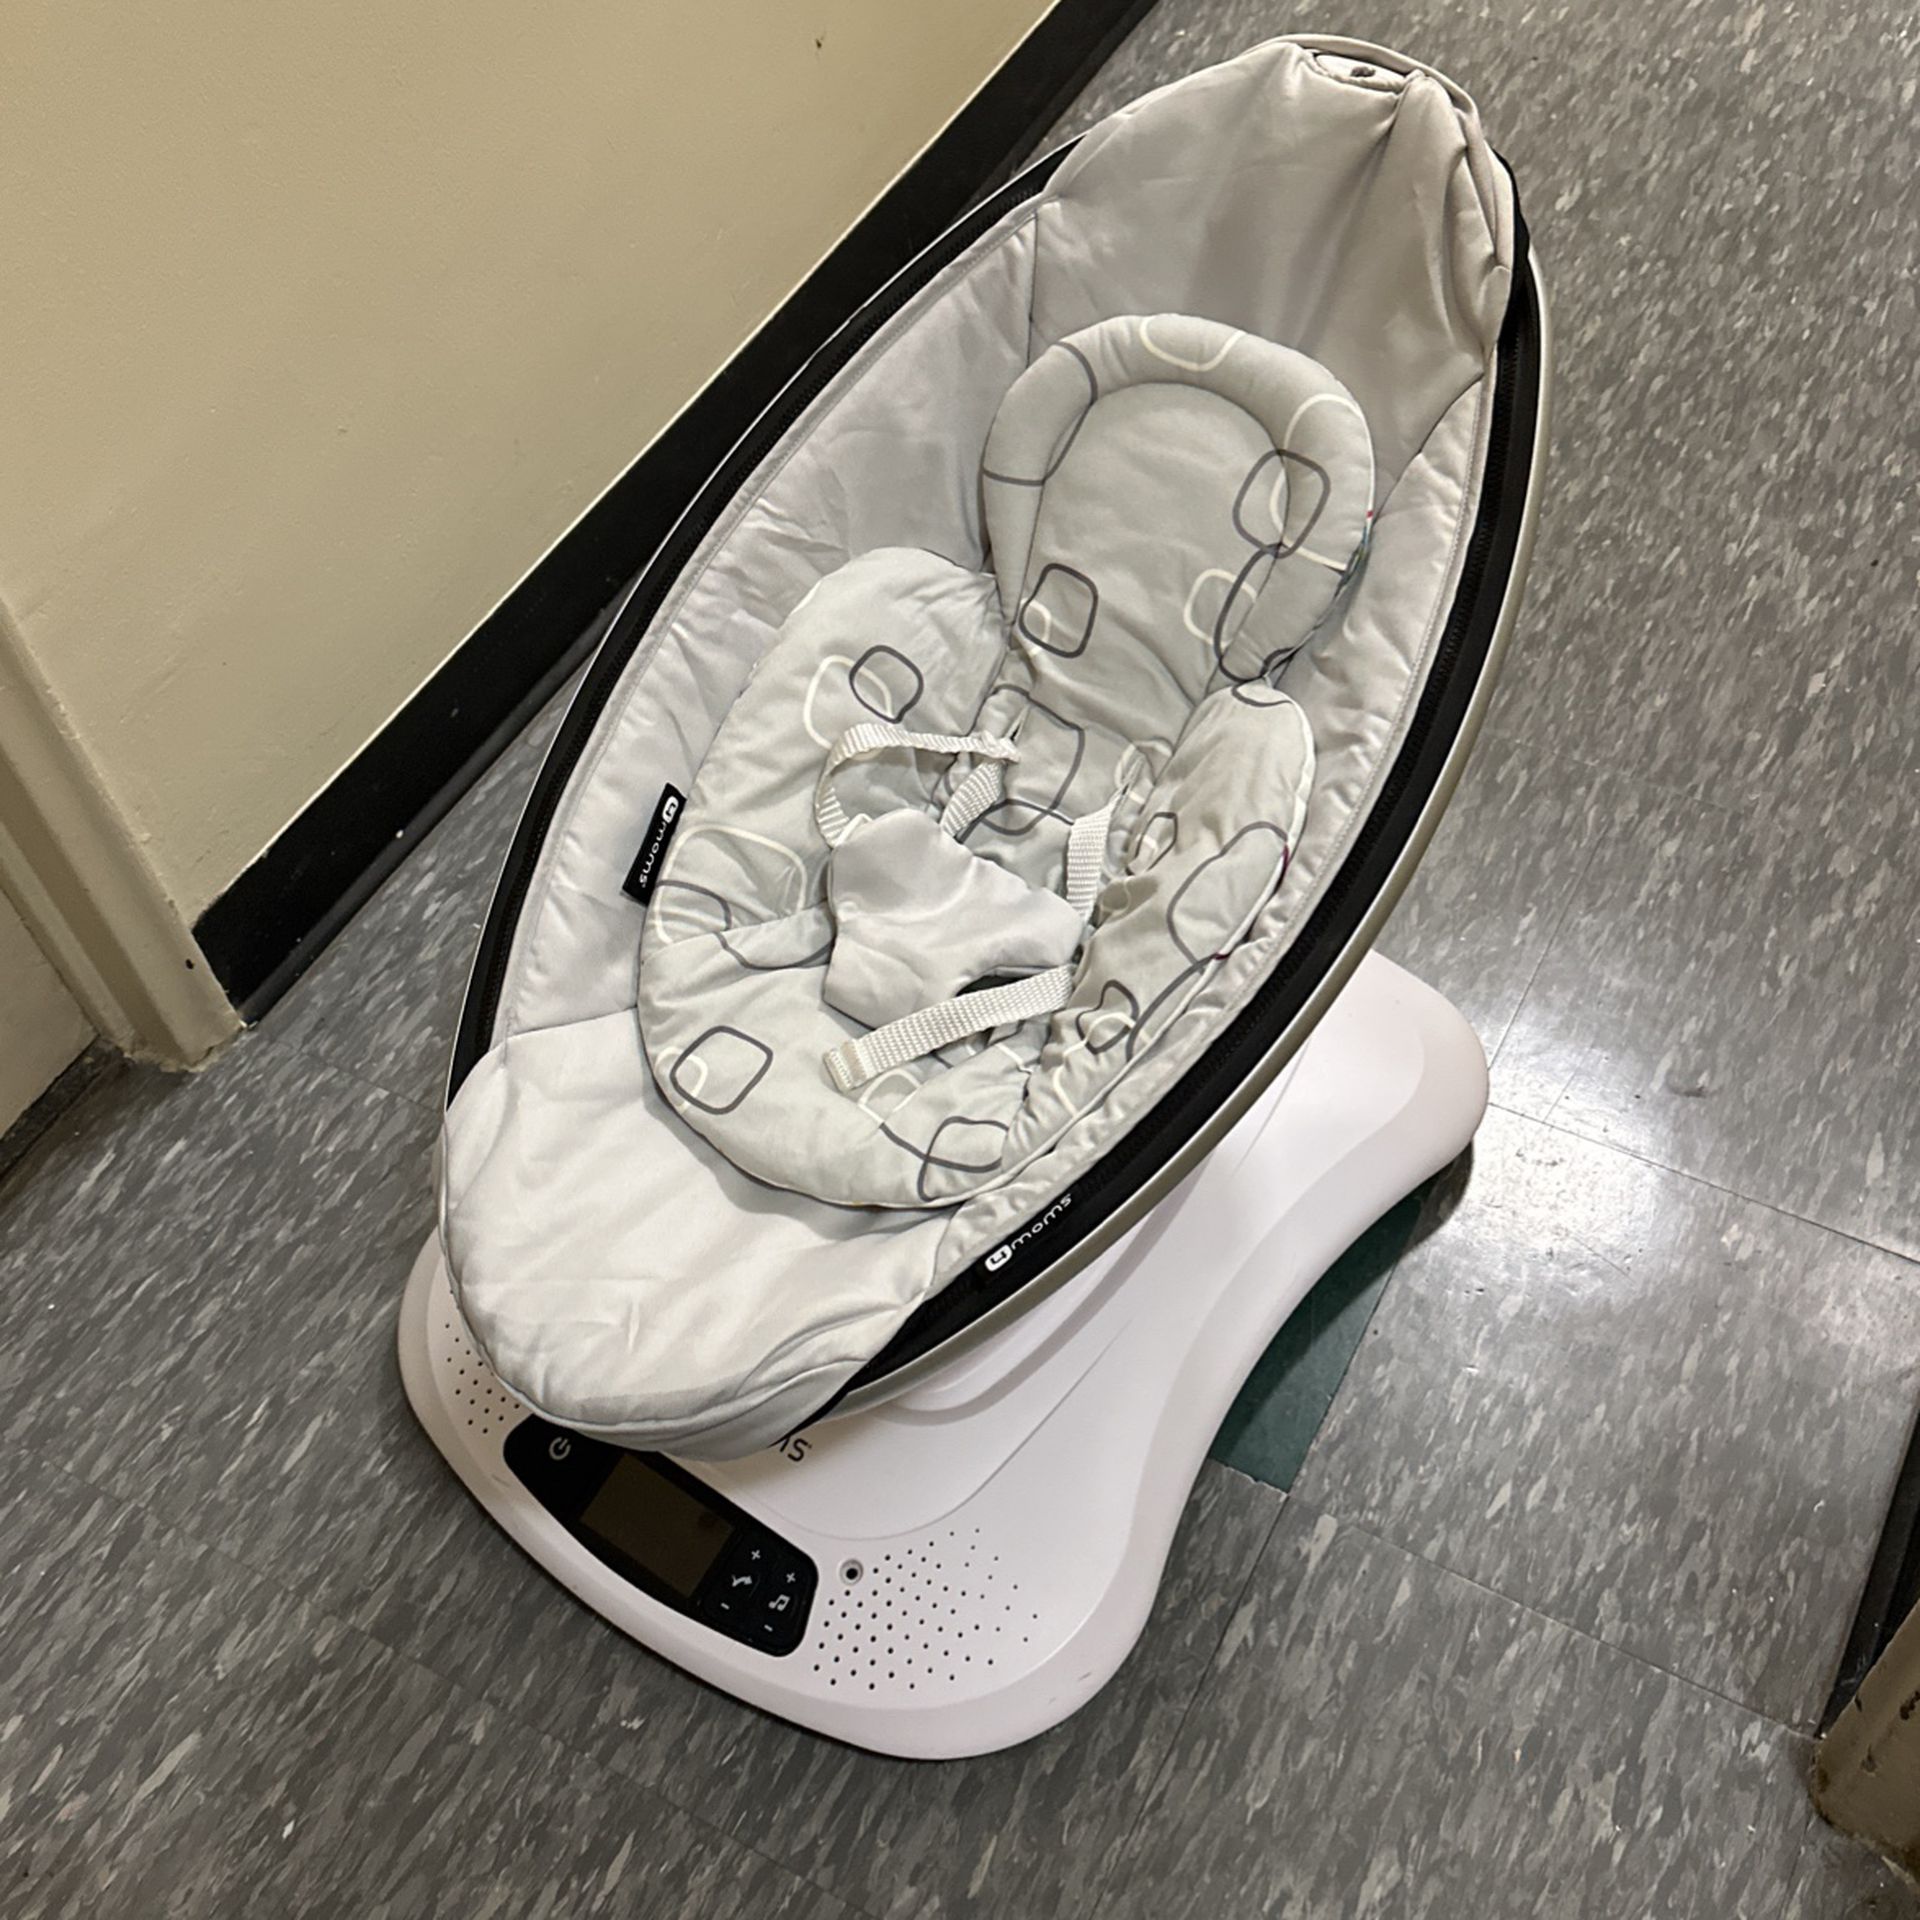 4moms MamaRoo With Reversible Infant Insert